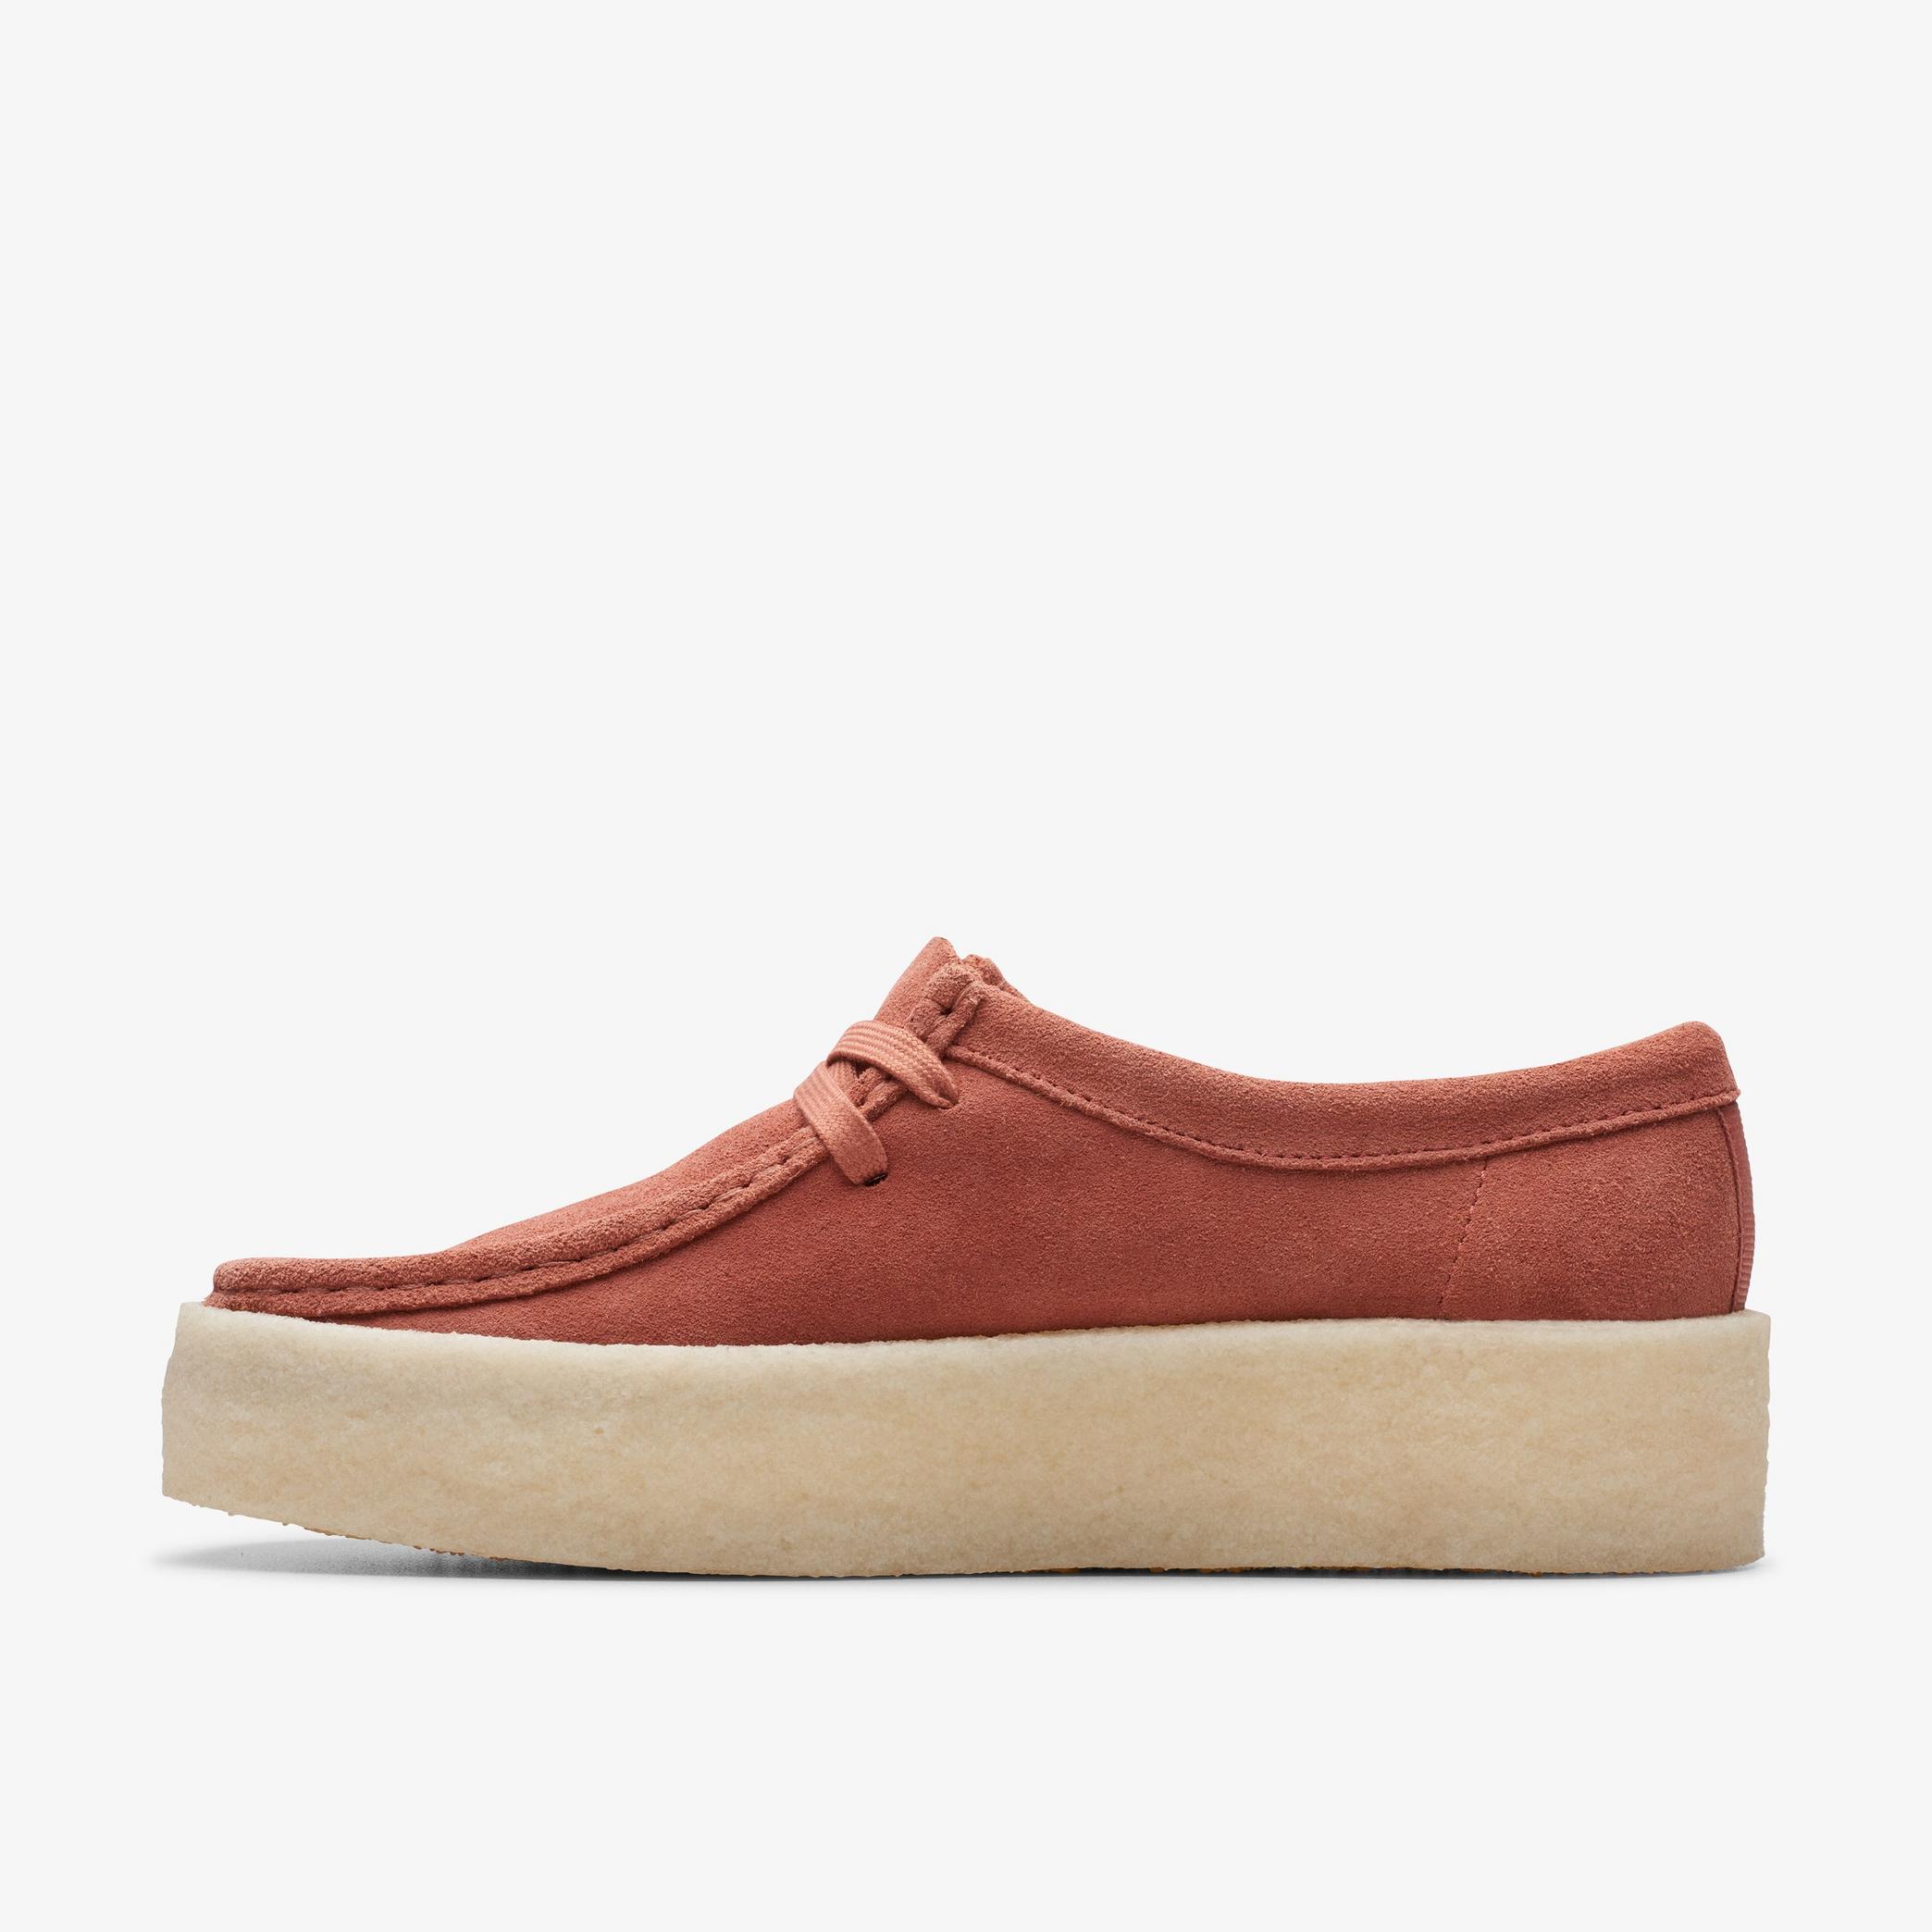 Wallabee Cup Terracotta Suede Wallabee, view 2 of 7